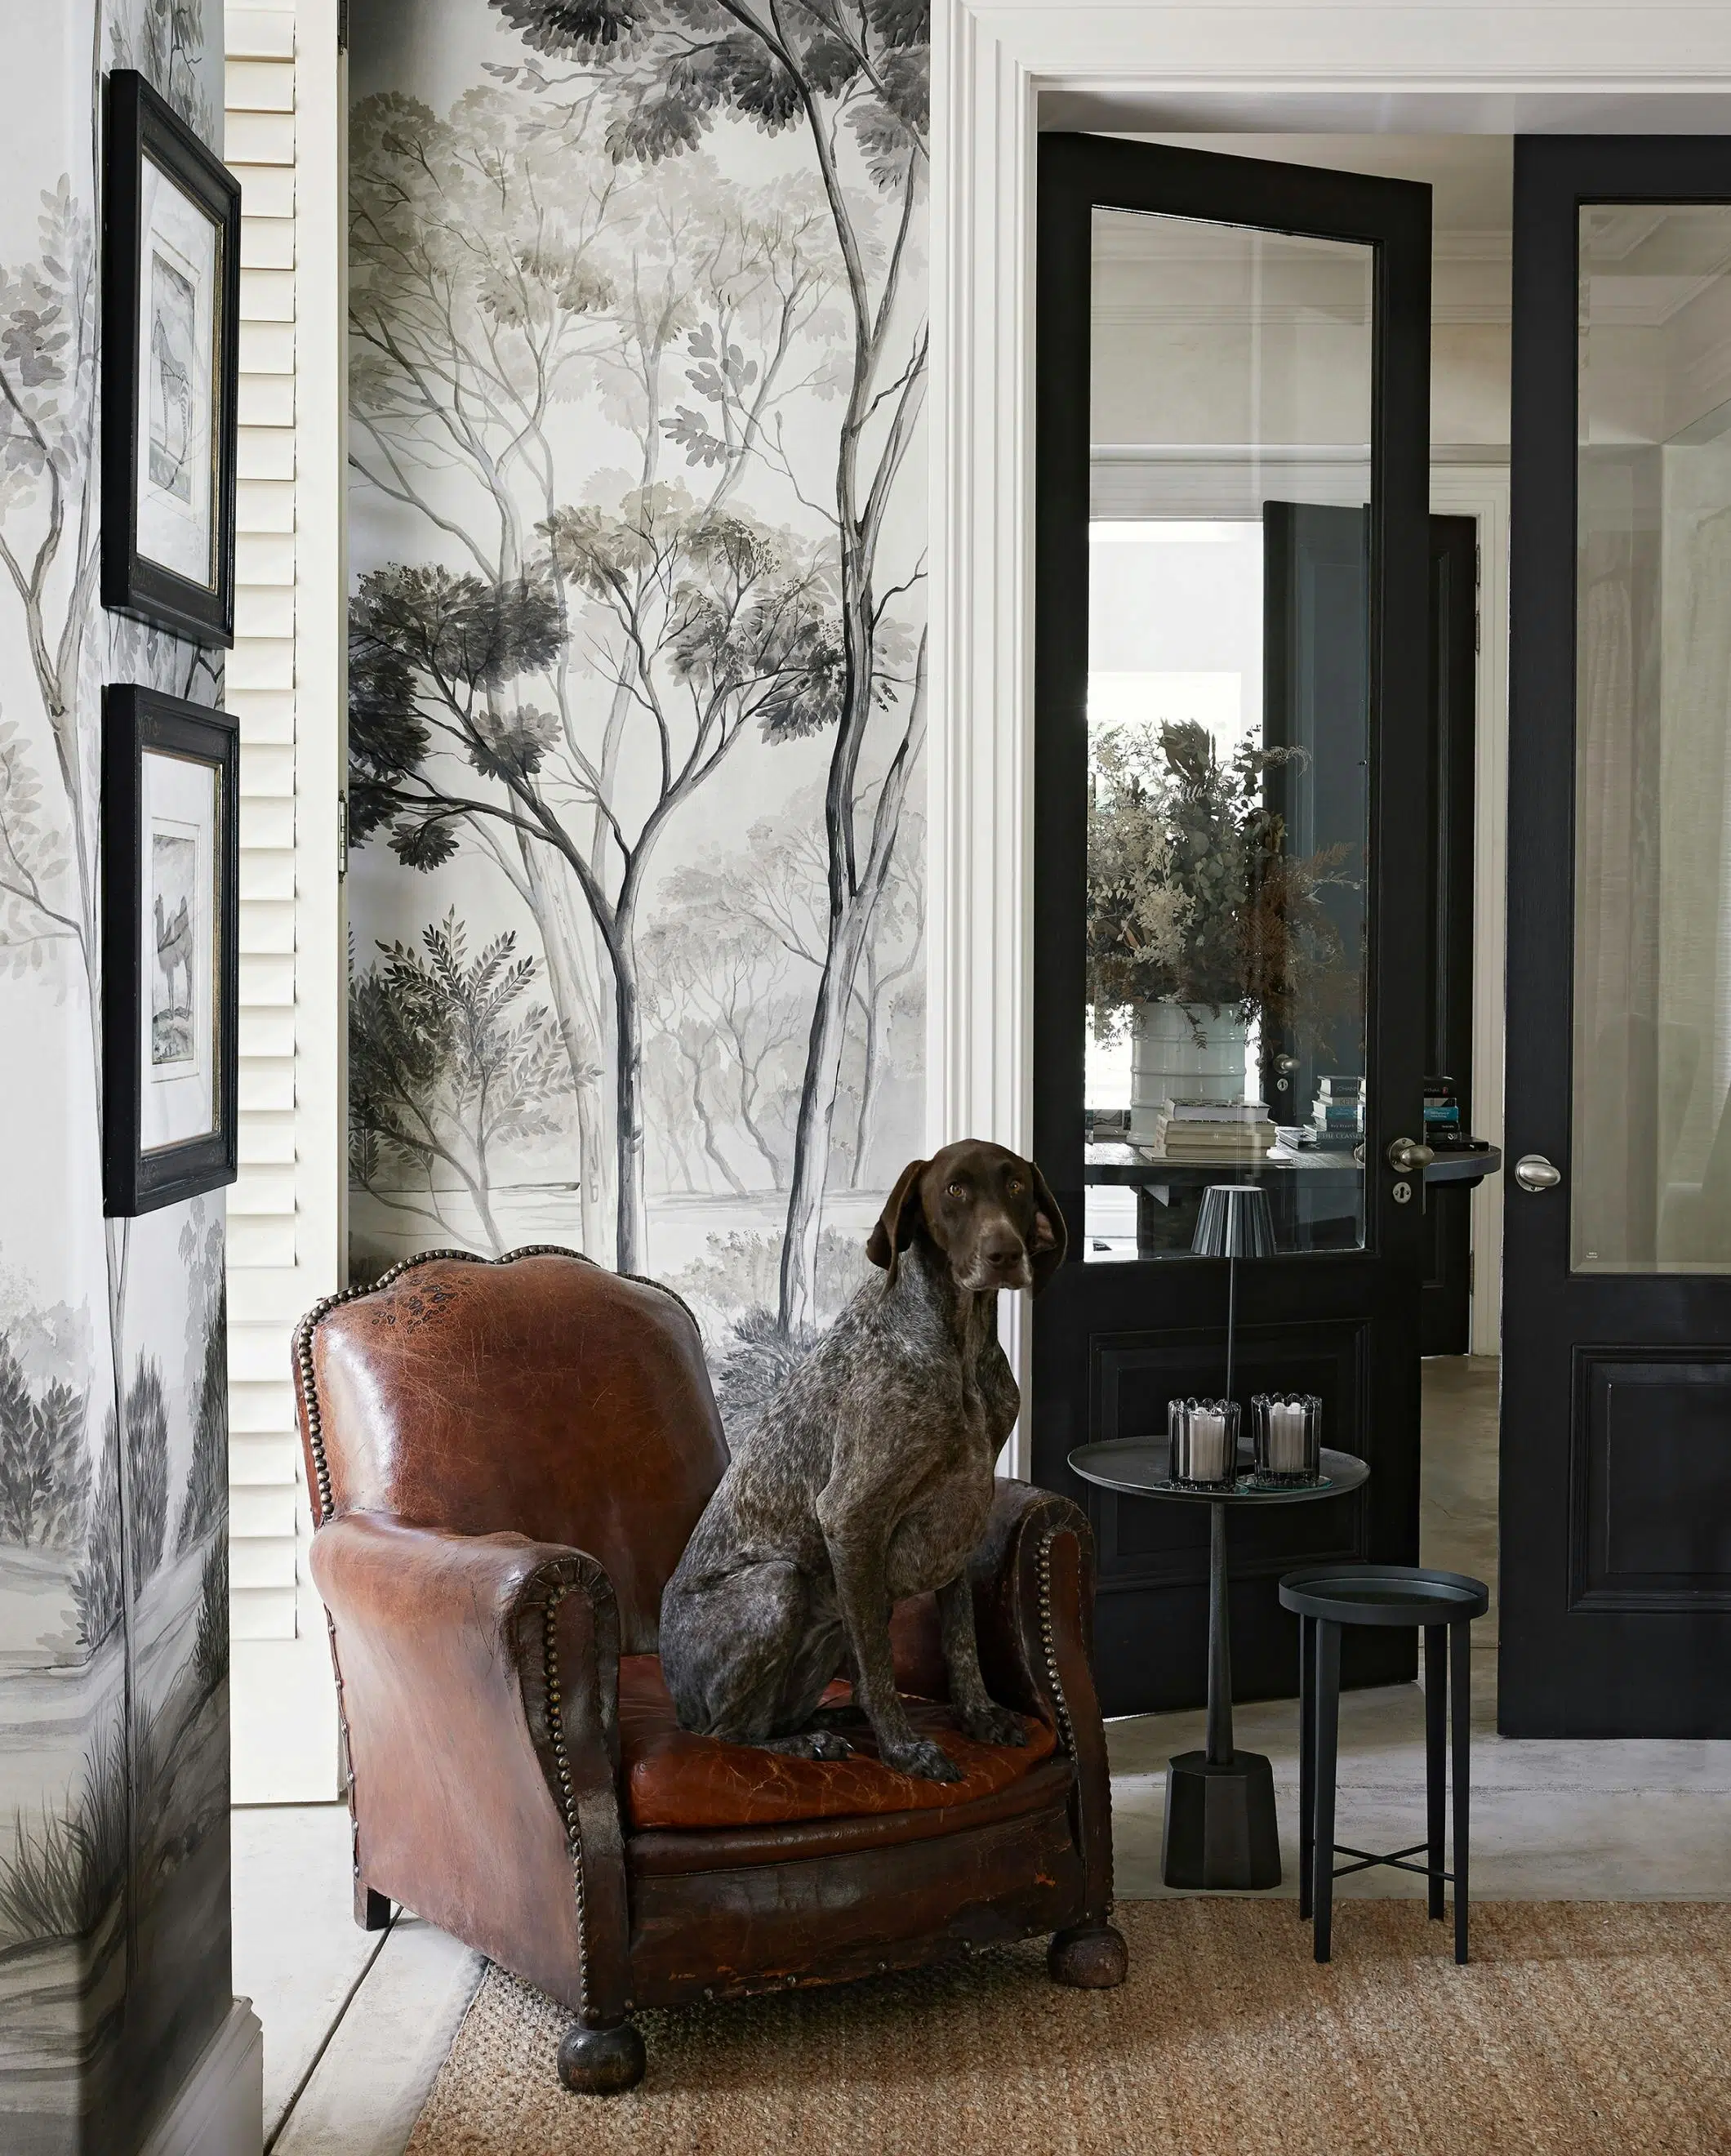 A large, shorthaired pointer dog with a speckled brown coat sits on a  brown leather armchair in front of wallpaper with grayscale illustrations of trees.